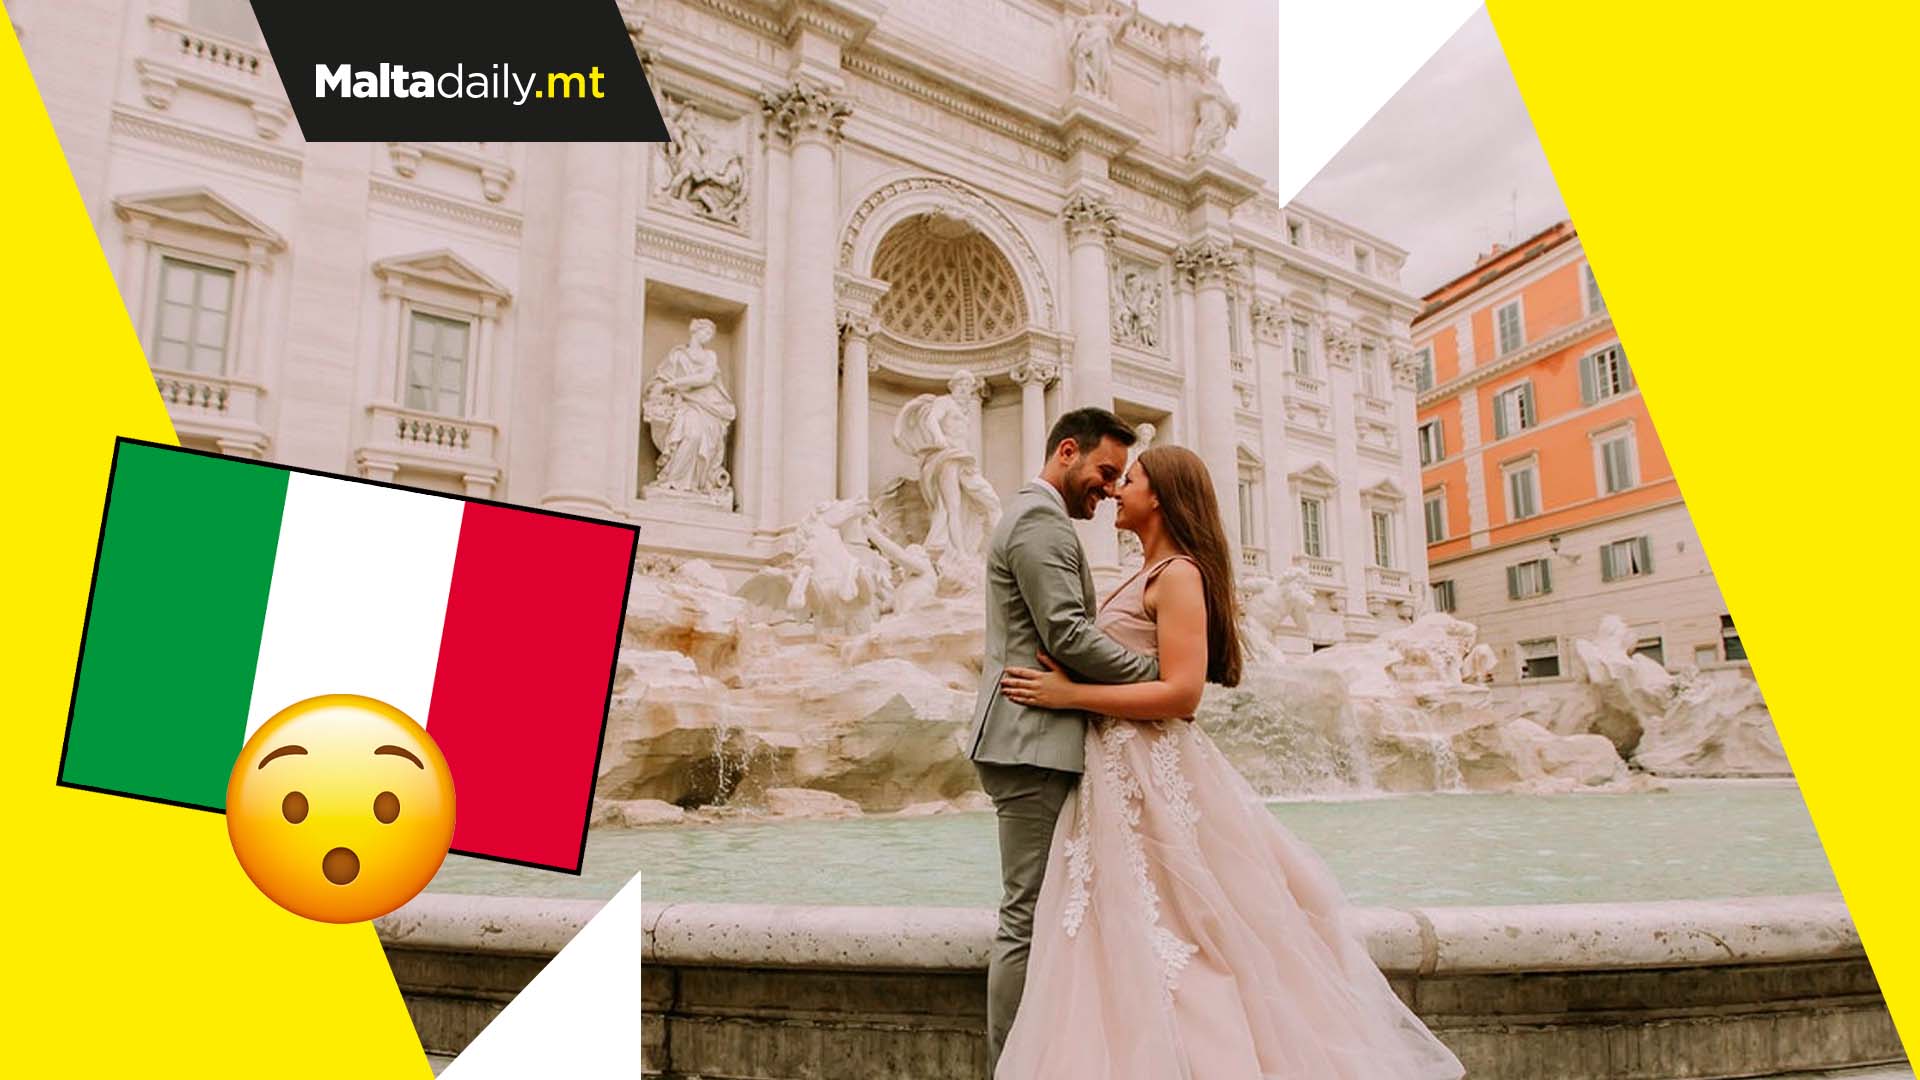 Couples offered €2000 wedding payments to get married in Rome